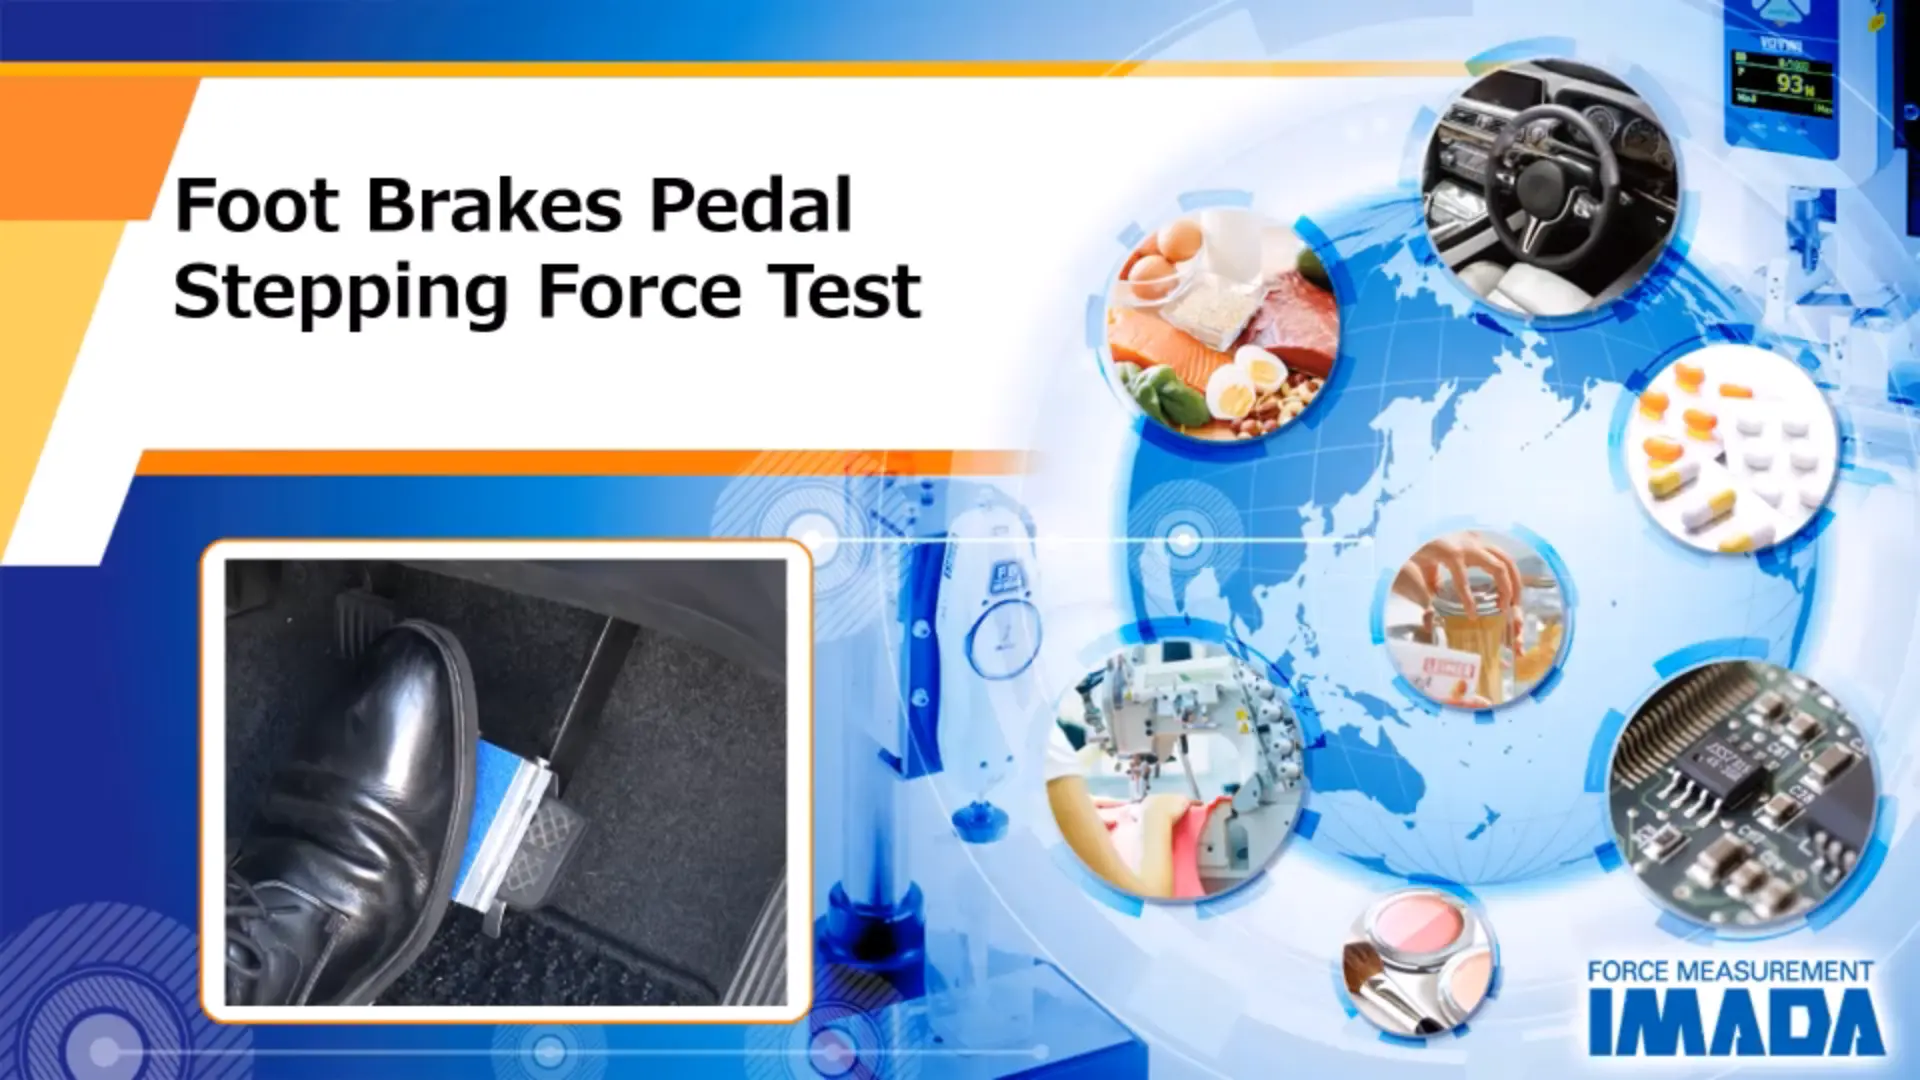 Foot Brakes Pedal Stepping Force Test